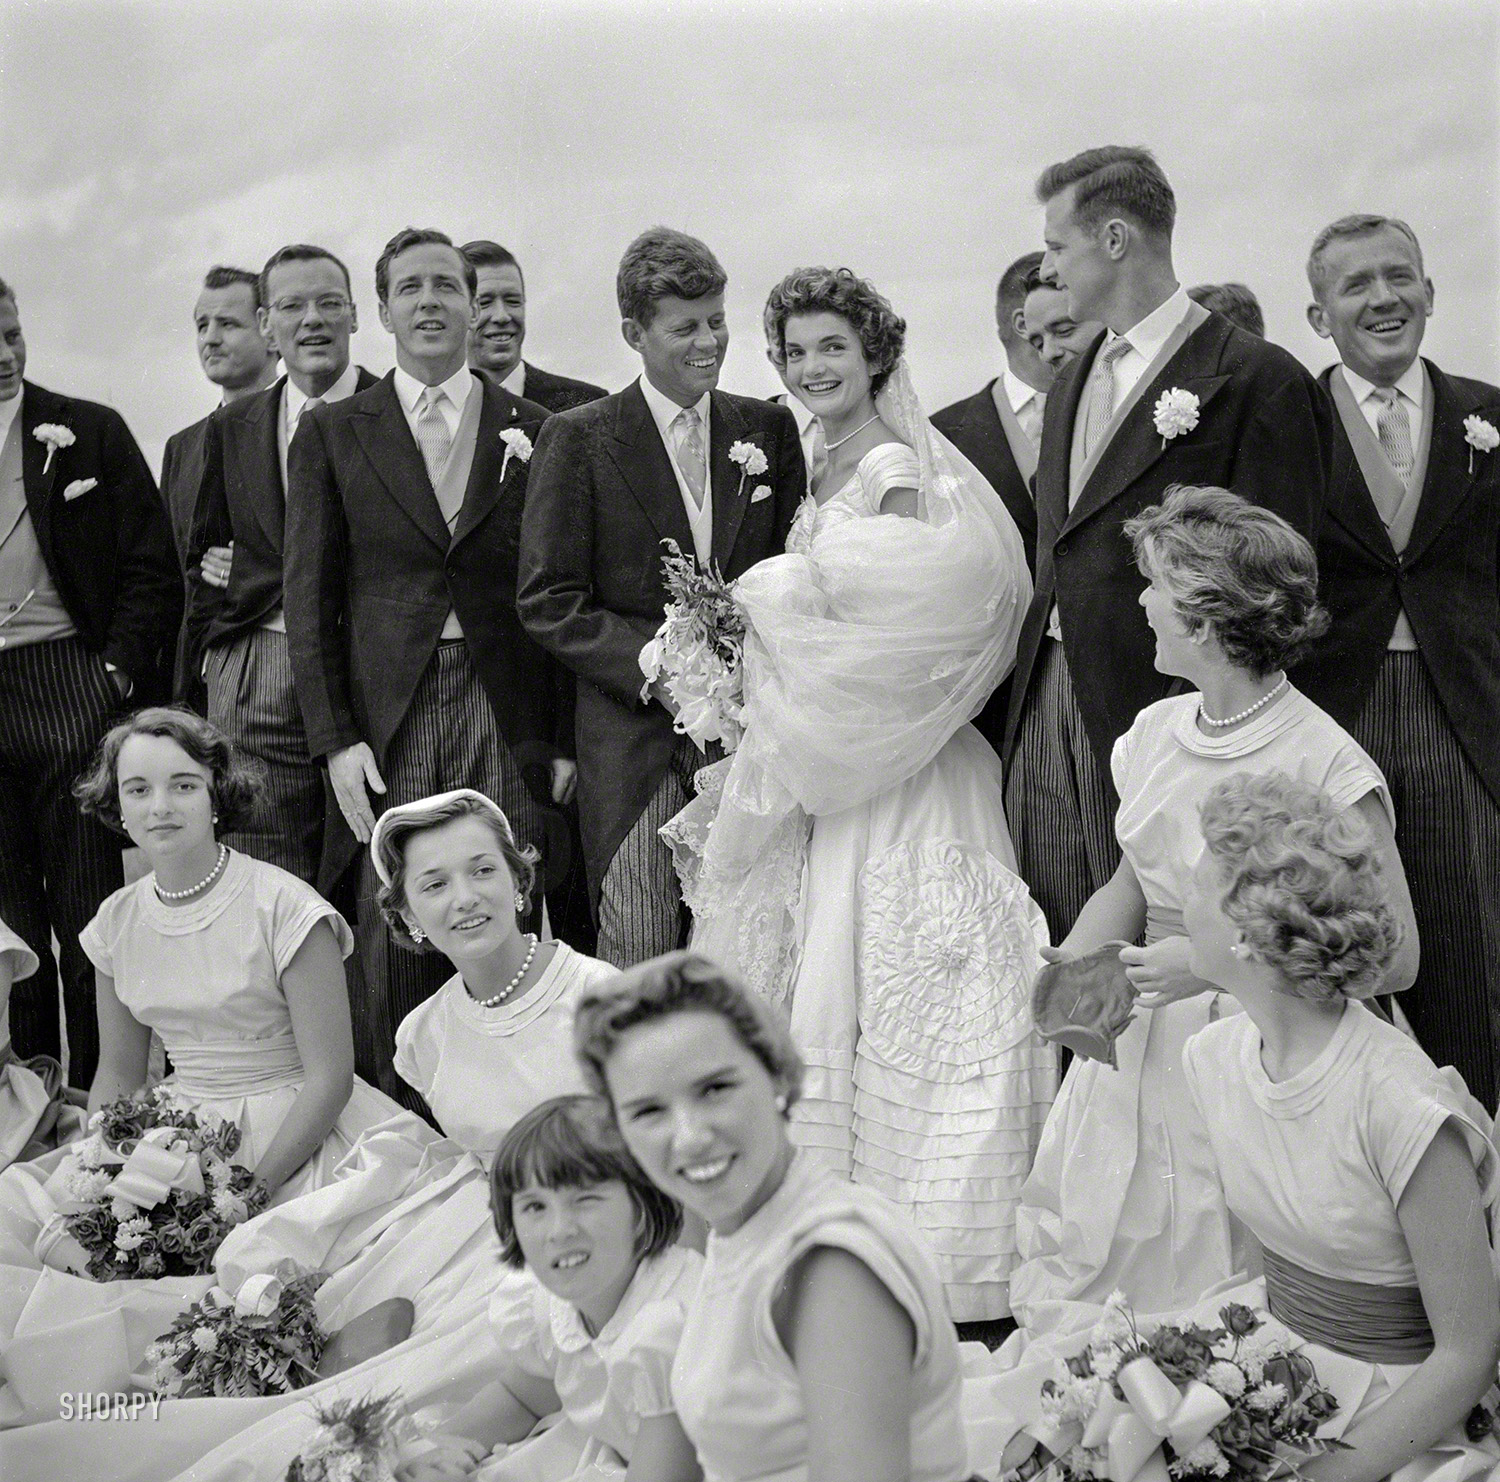 "Jacqueline Bouvier and John F. Kennedy at their wedding, September 12, 1953, Newport, Rhode Island." Acetate negative by Toni Frissell. View full size.